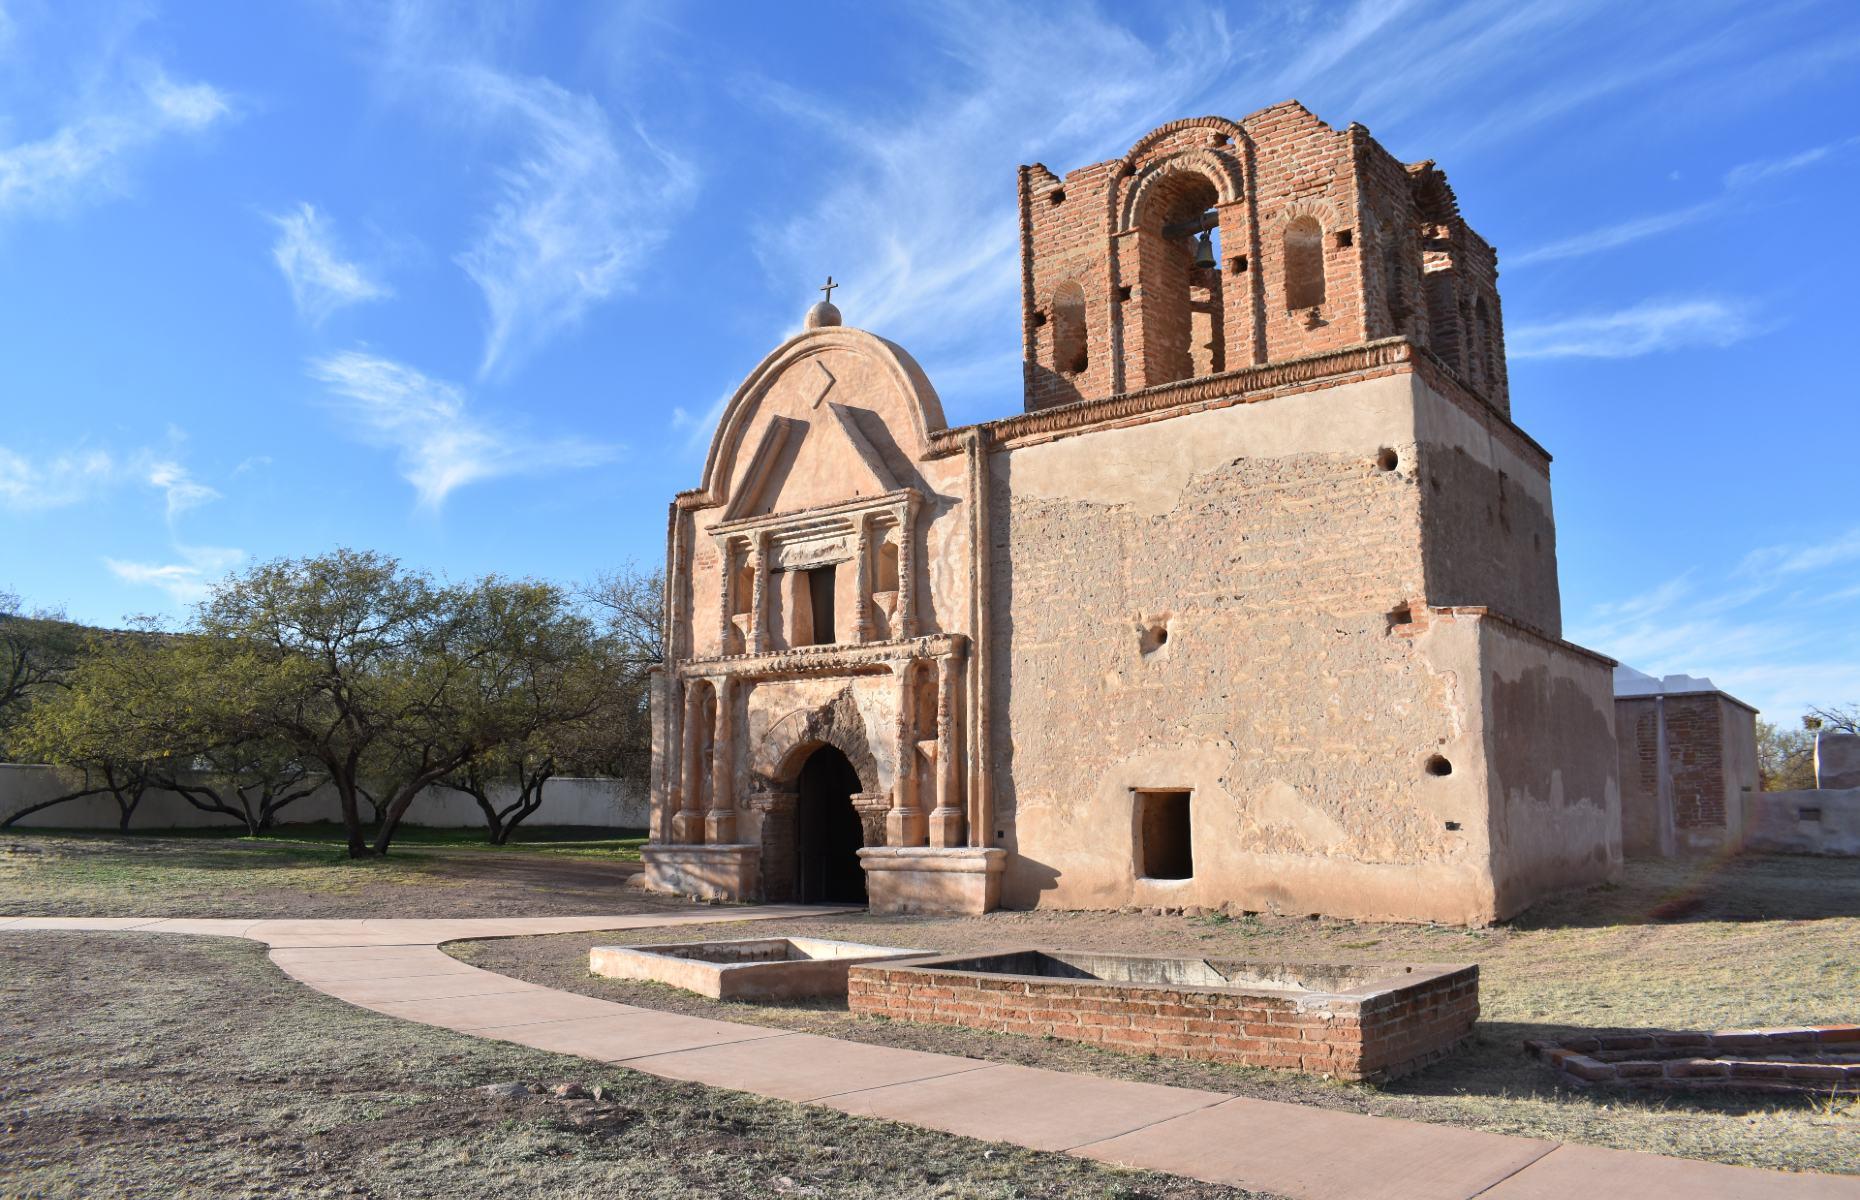 <p>To discover Arizona’s complex history, the Tumacácori National Historical Park is a good place to start. Situated in the Santa Cruz River Valley, around an hour south of Tucson, the site is home to one of the state’s earliest missions, the Mission San José de Tumacácori. First established by Spanish settlers in 1691, the present-day mission dates to the 1750s, although the building was never completed. It was built on land held by the O’odham people for thousands of years and became a site of conflict between Spanish and indigenous people. Today, you can visit the church and hike through the park.</p>